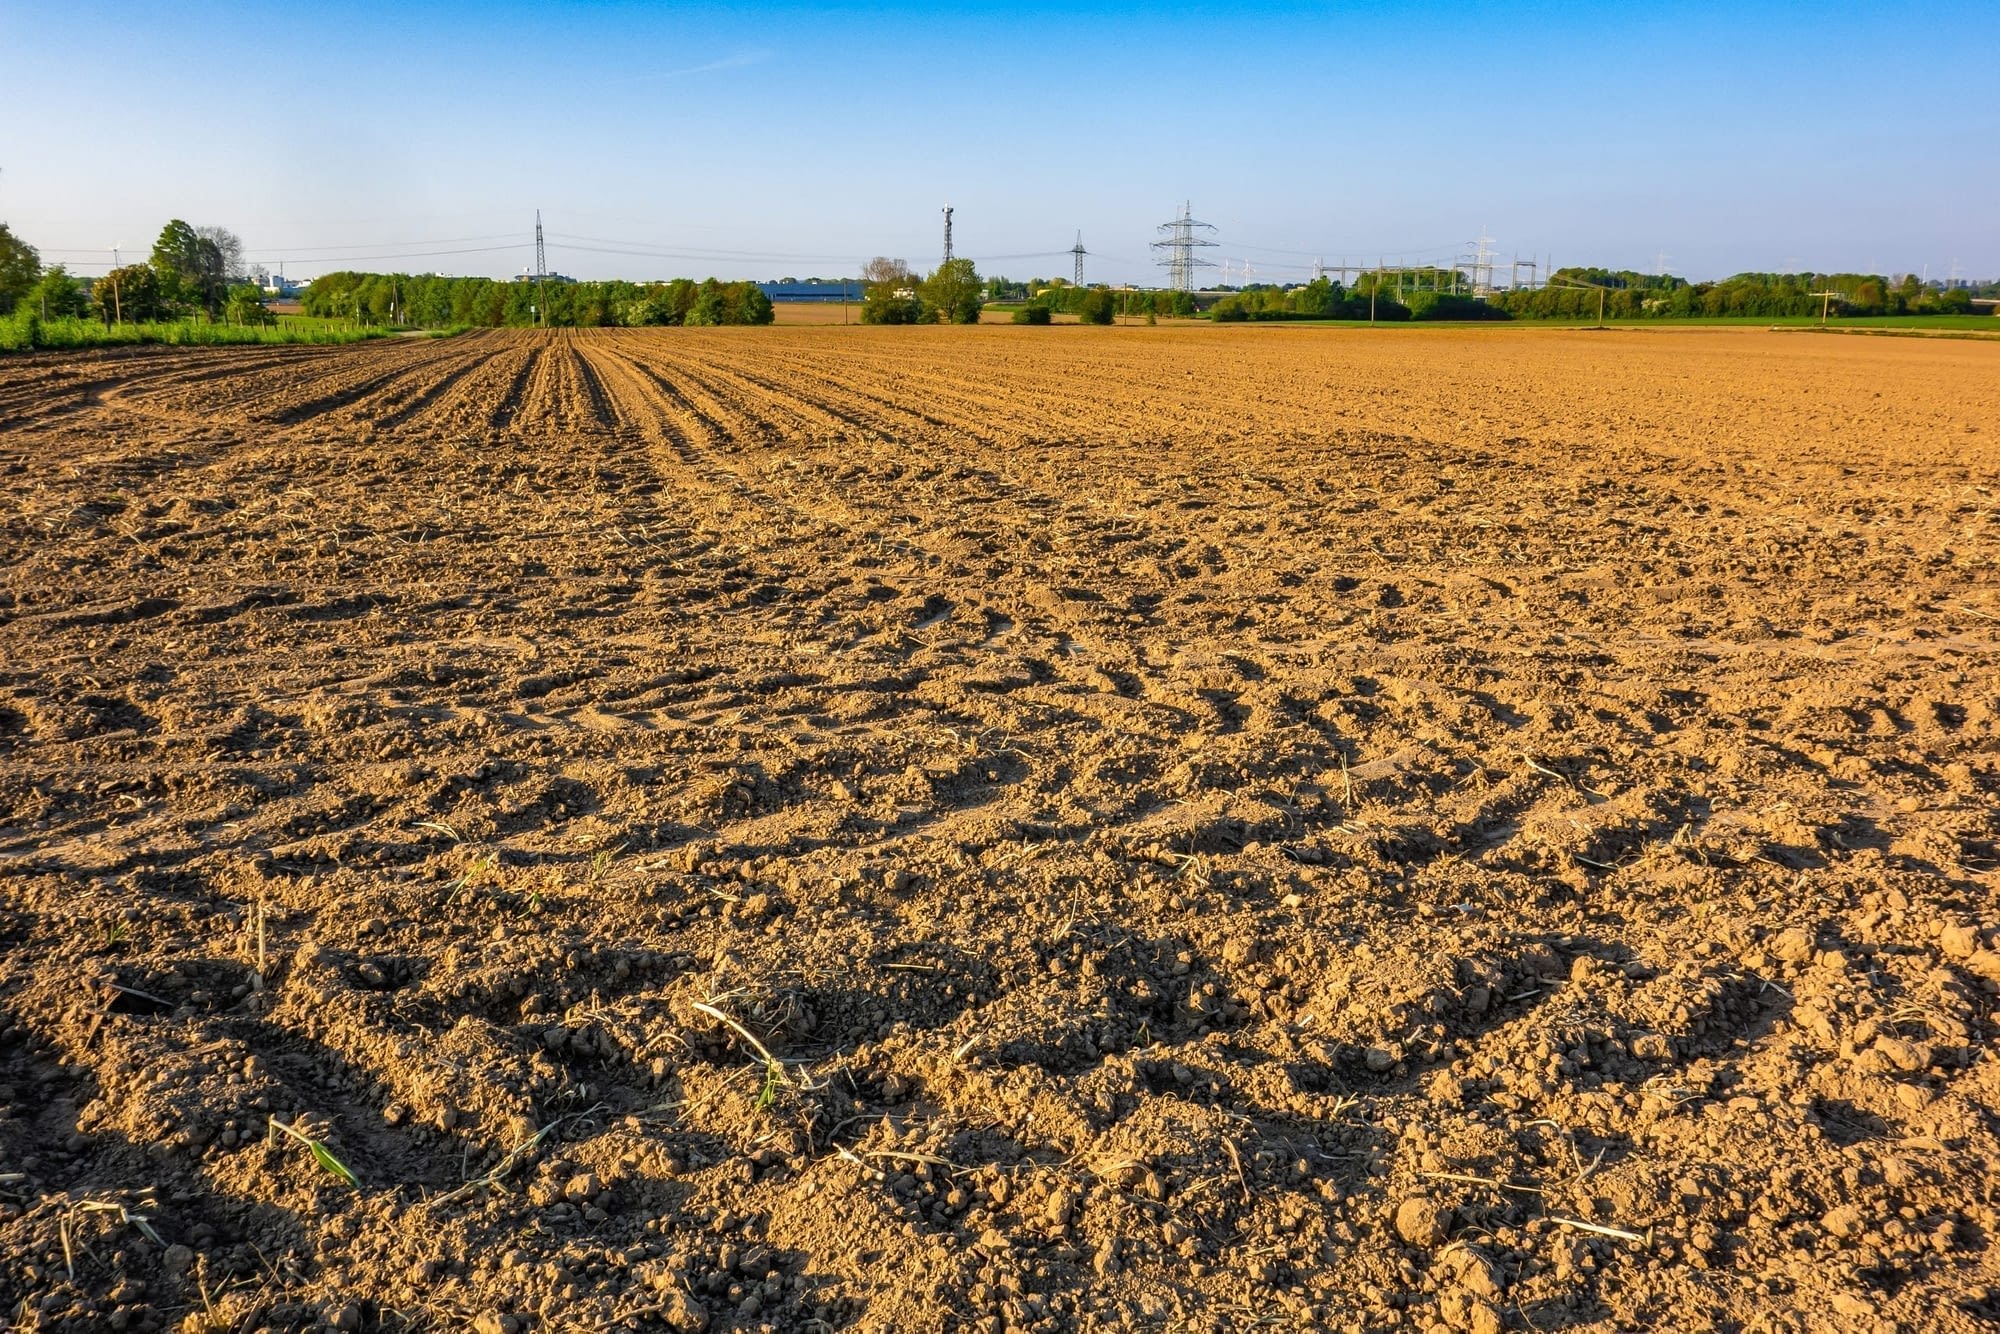 A view of an agricultural field in a rural area captured on a bright sunny day